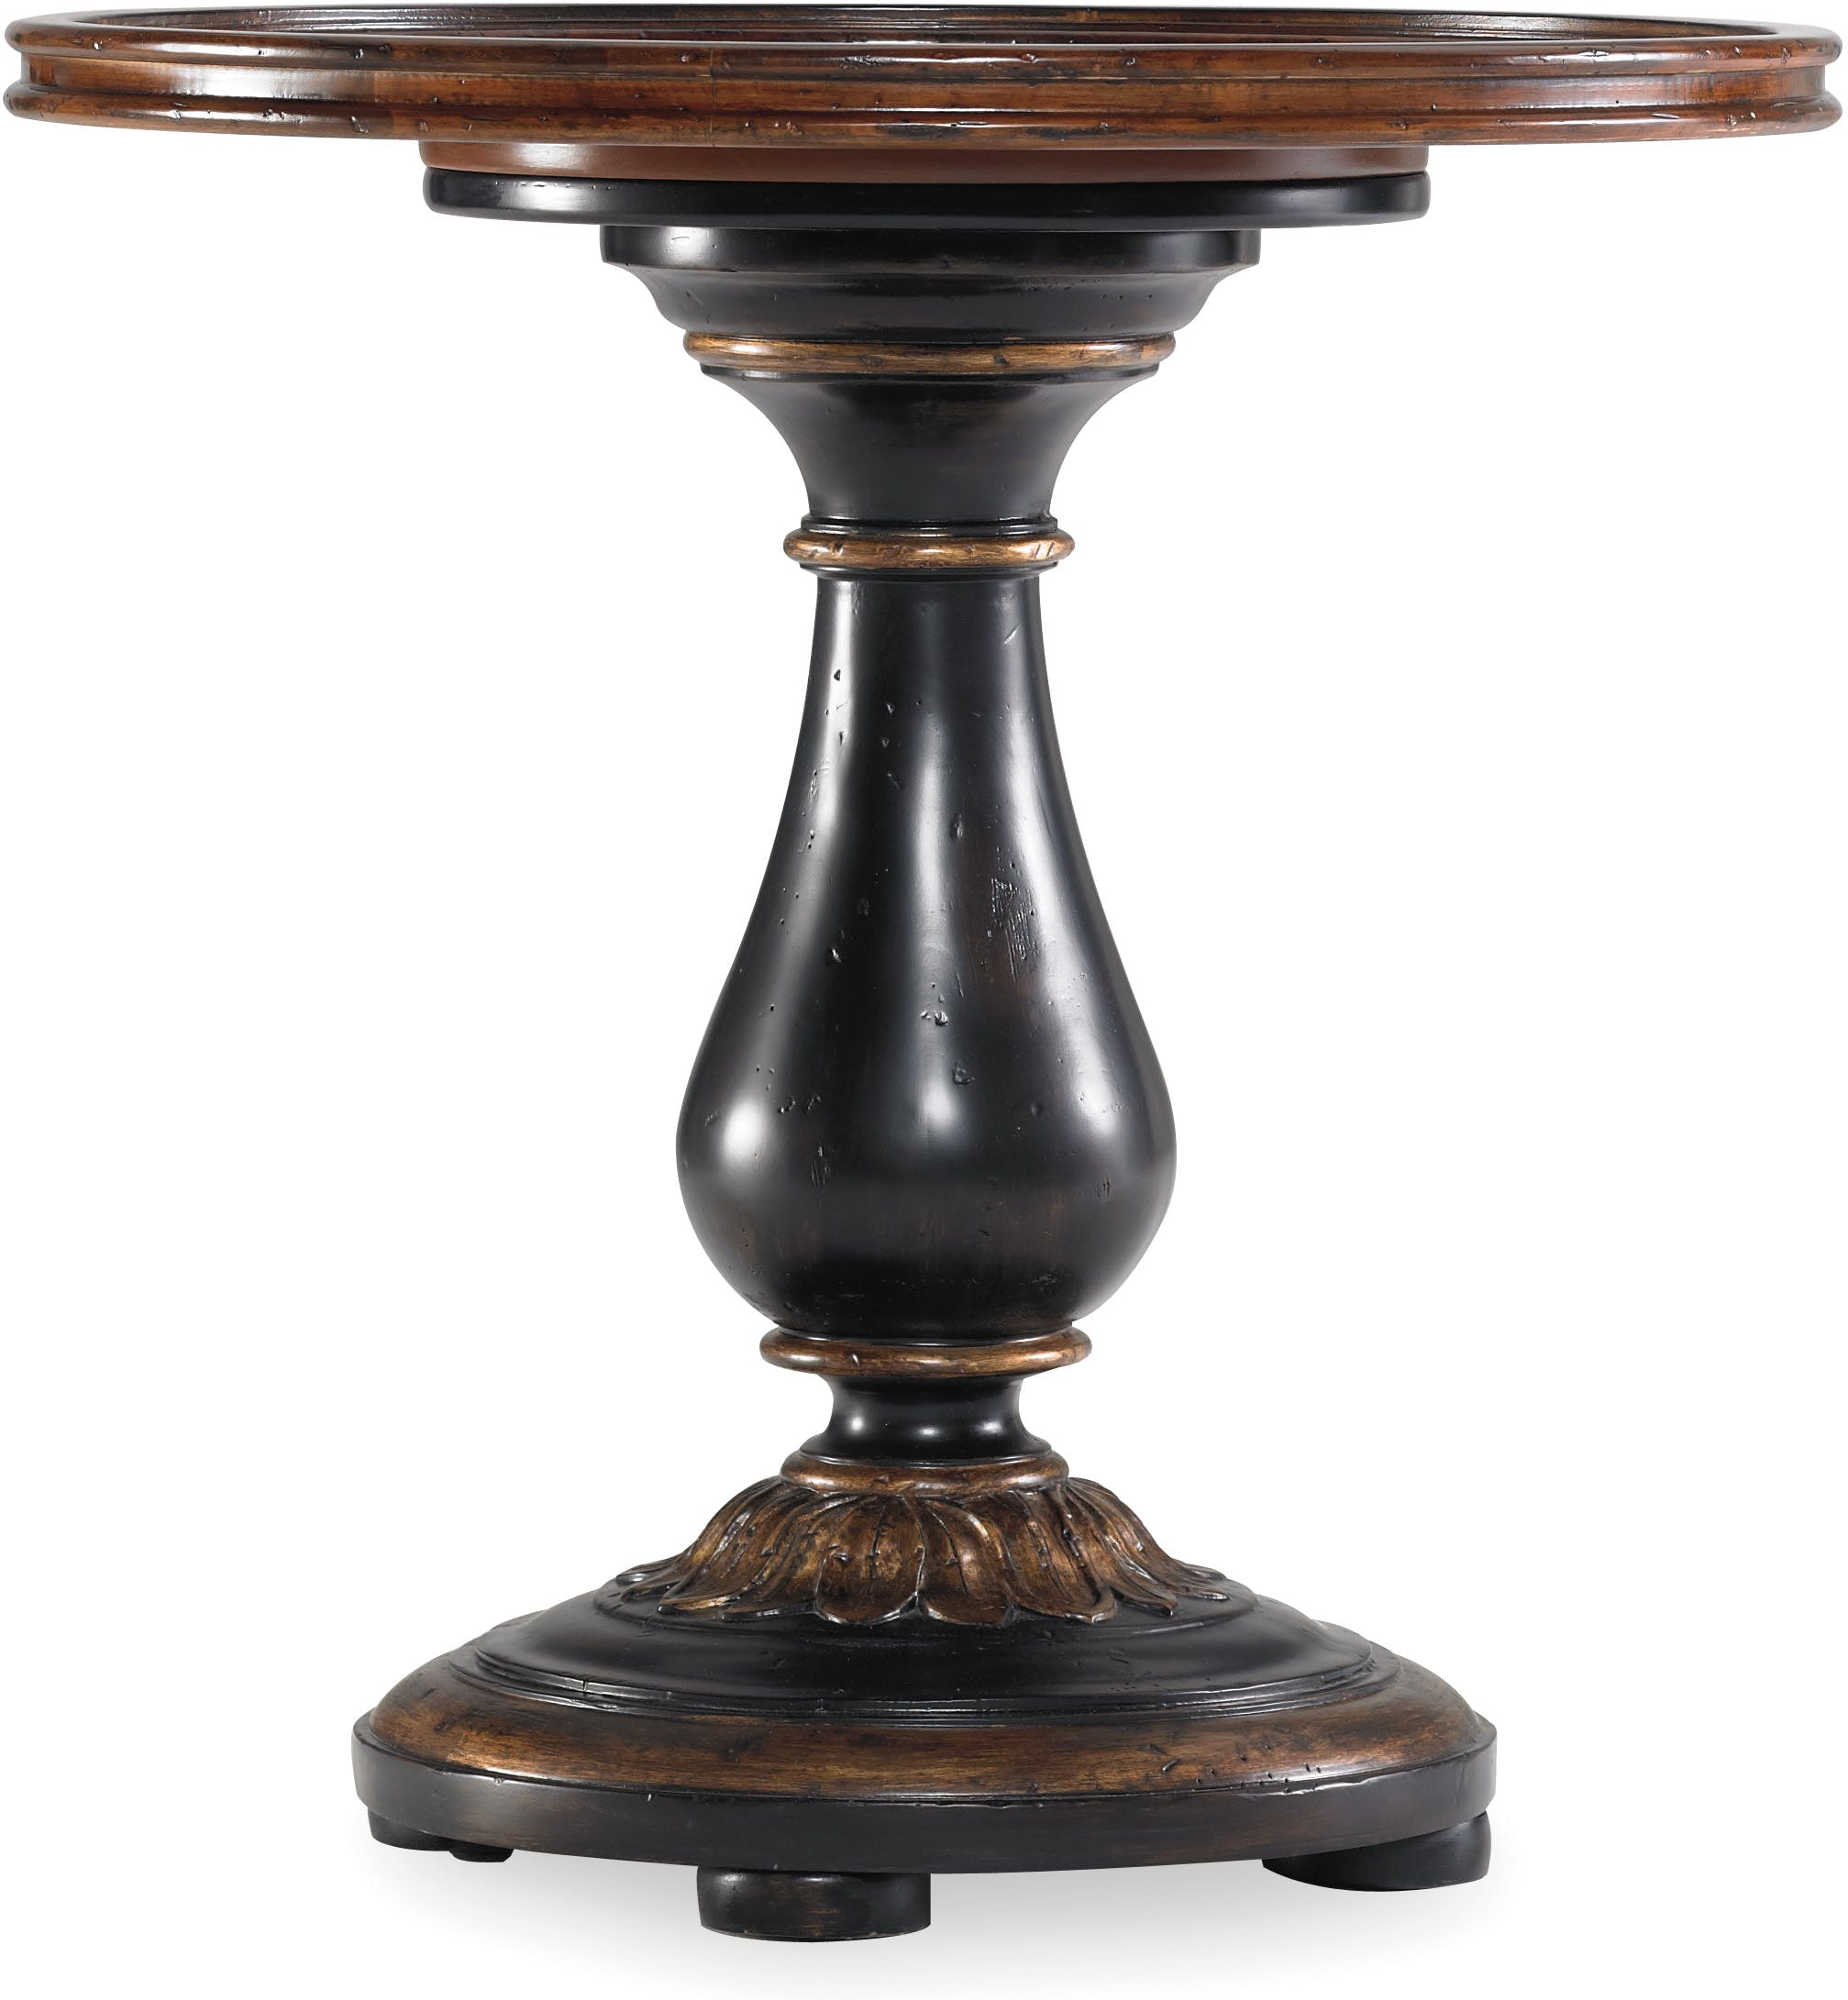 hooker furniture living room grandover round accent table treasure trove end console with bench vintage black and silver lamps reviews half moon glass gold metal lamp small phone